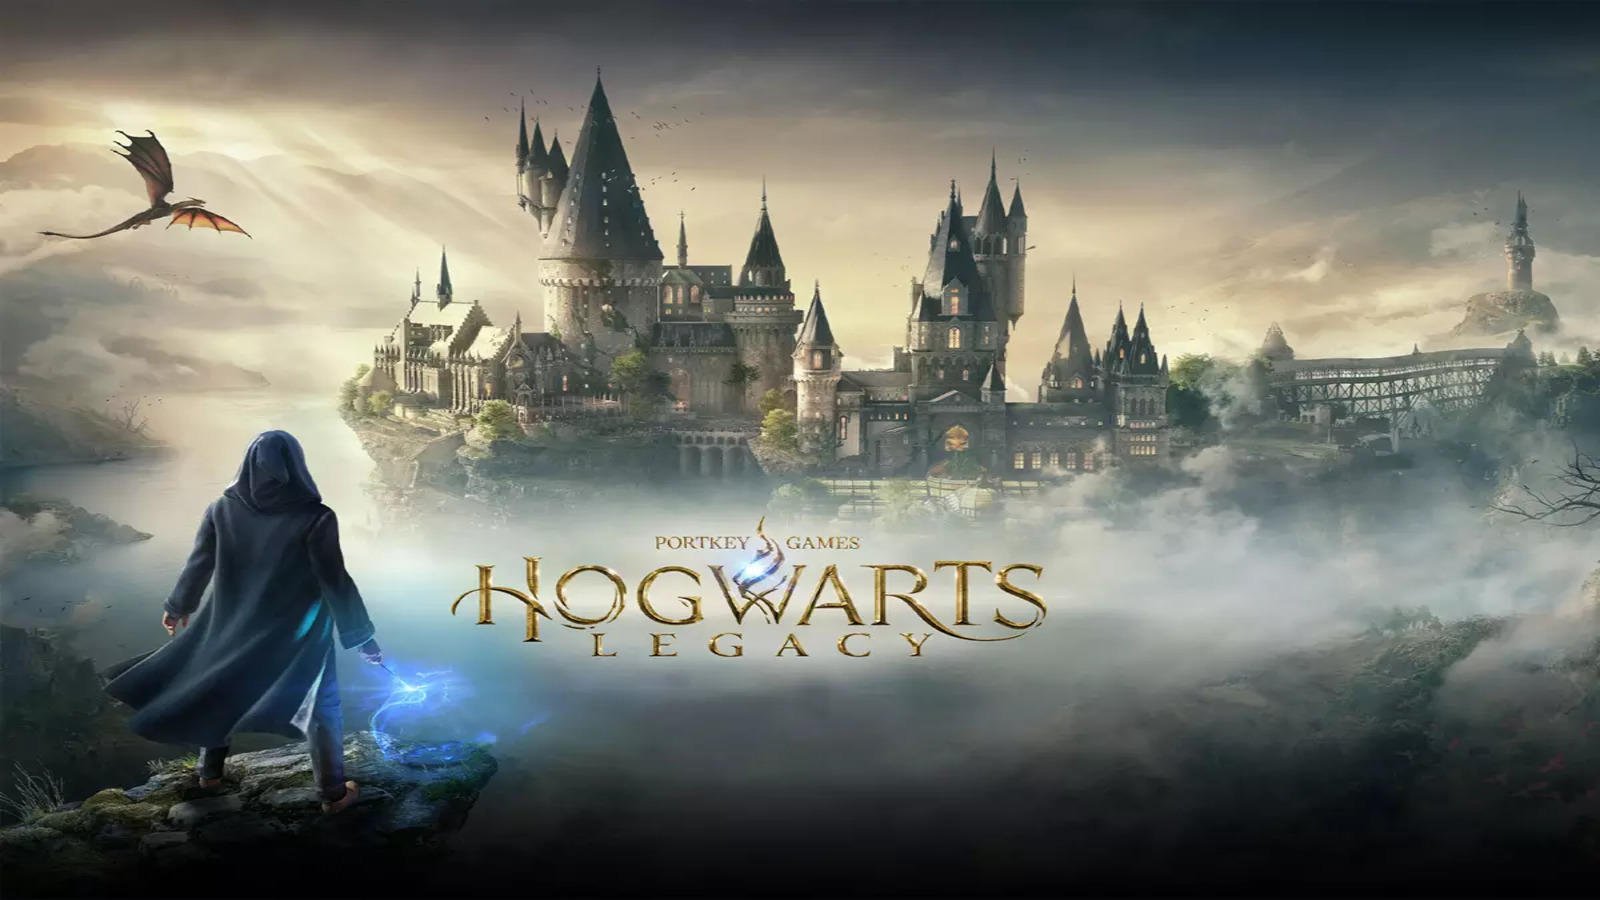 hogwarts legacy has been garnering rave reviews from gamers